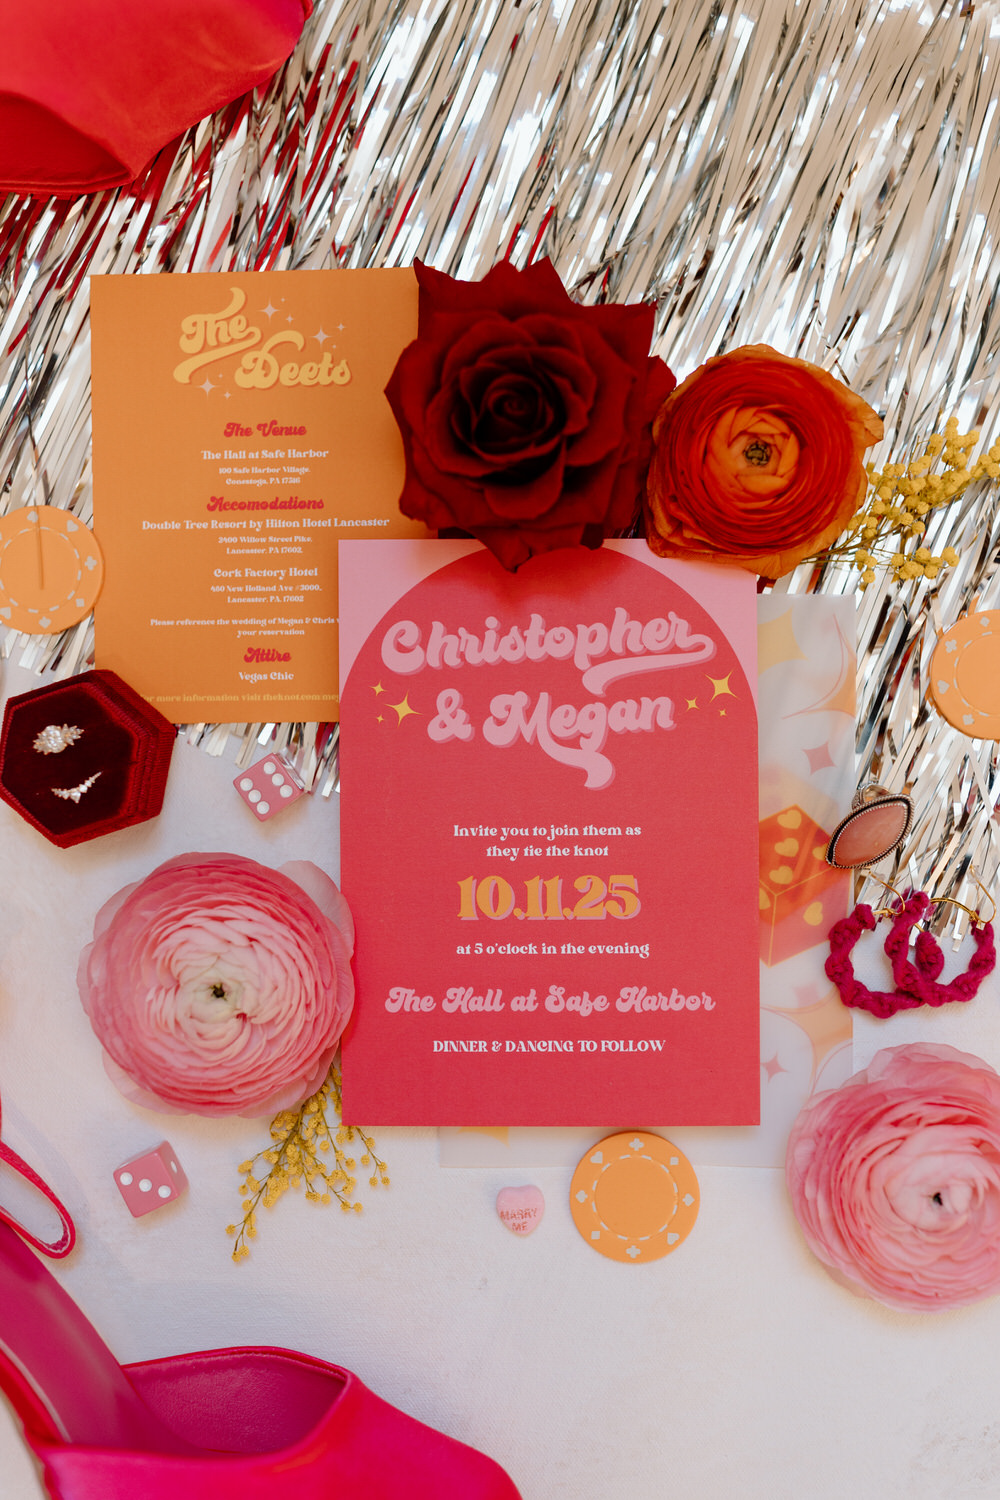 A pink and orange invitation design for Vegas themed wedding ideas.